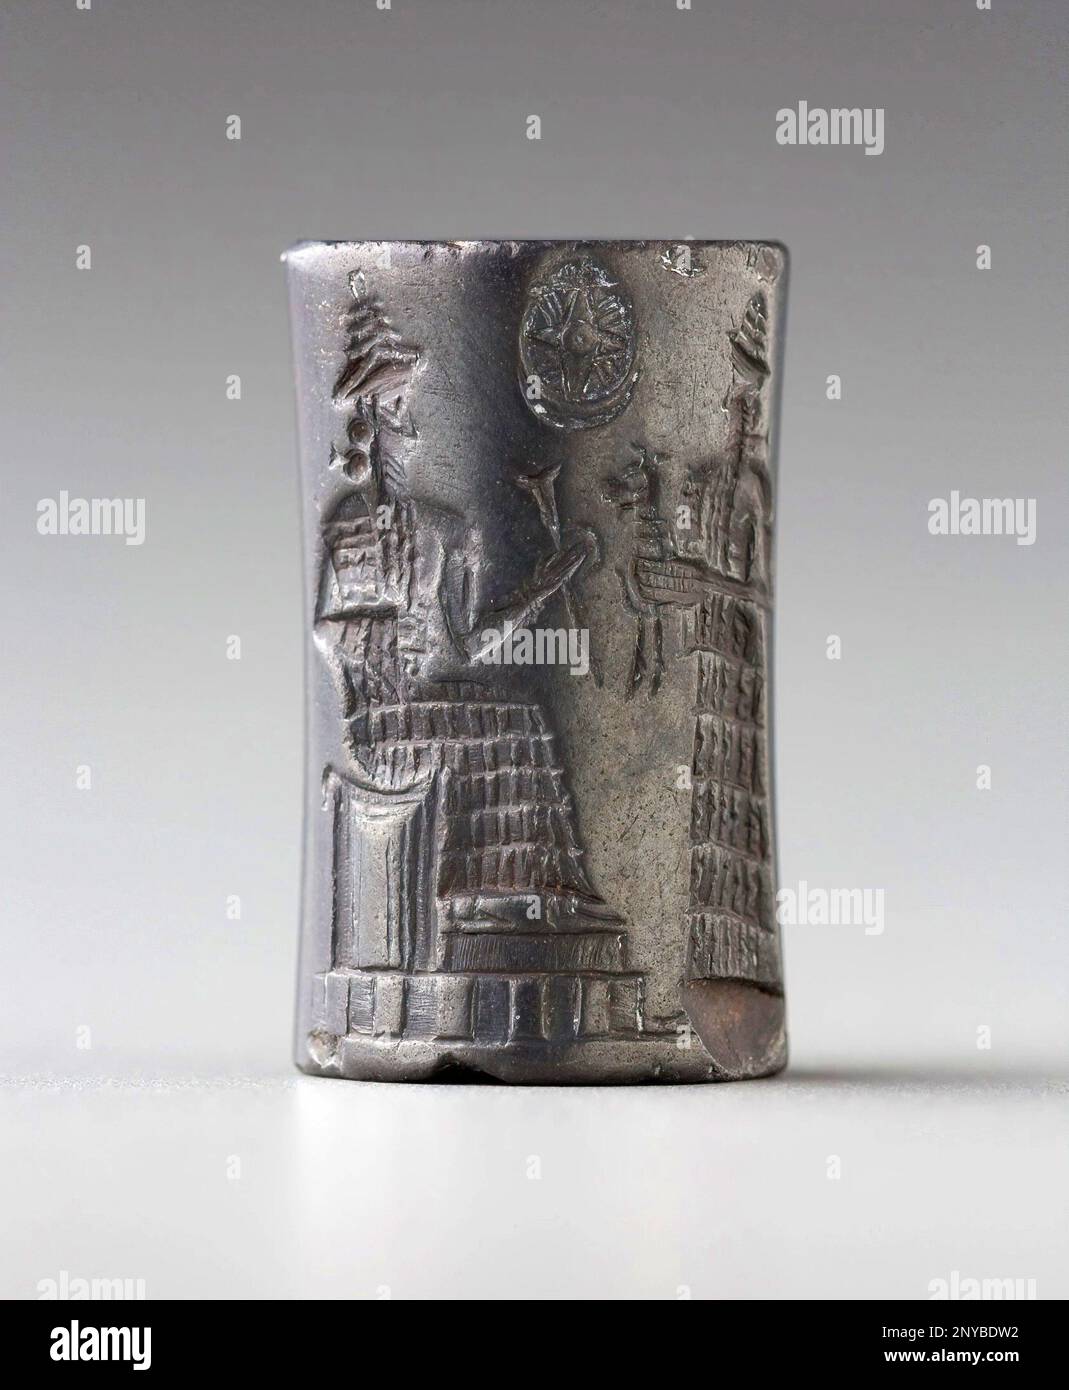 Cylinder Seal with Presentation Scene, 1900 - 1600 BCE. Babylonian, Mesopotamian. Hematite..Overall: 1 1/8 × 11/16 inches (2.9 × 1.7 cm). This Stock Photo